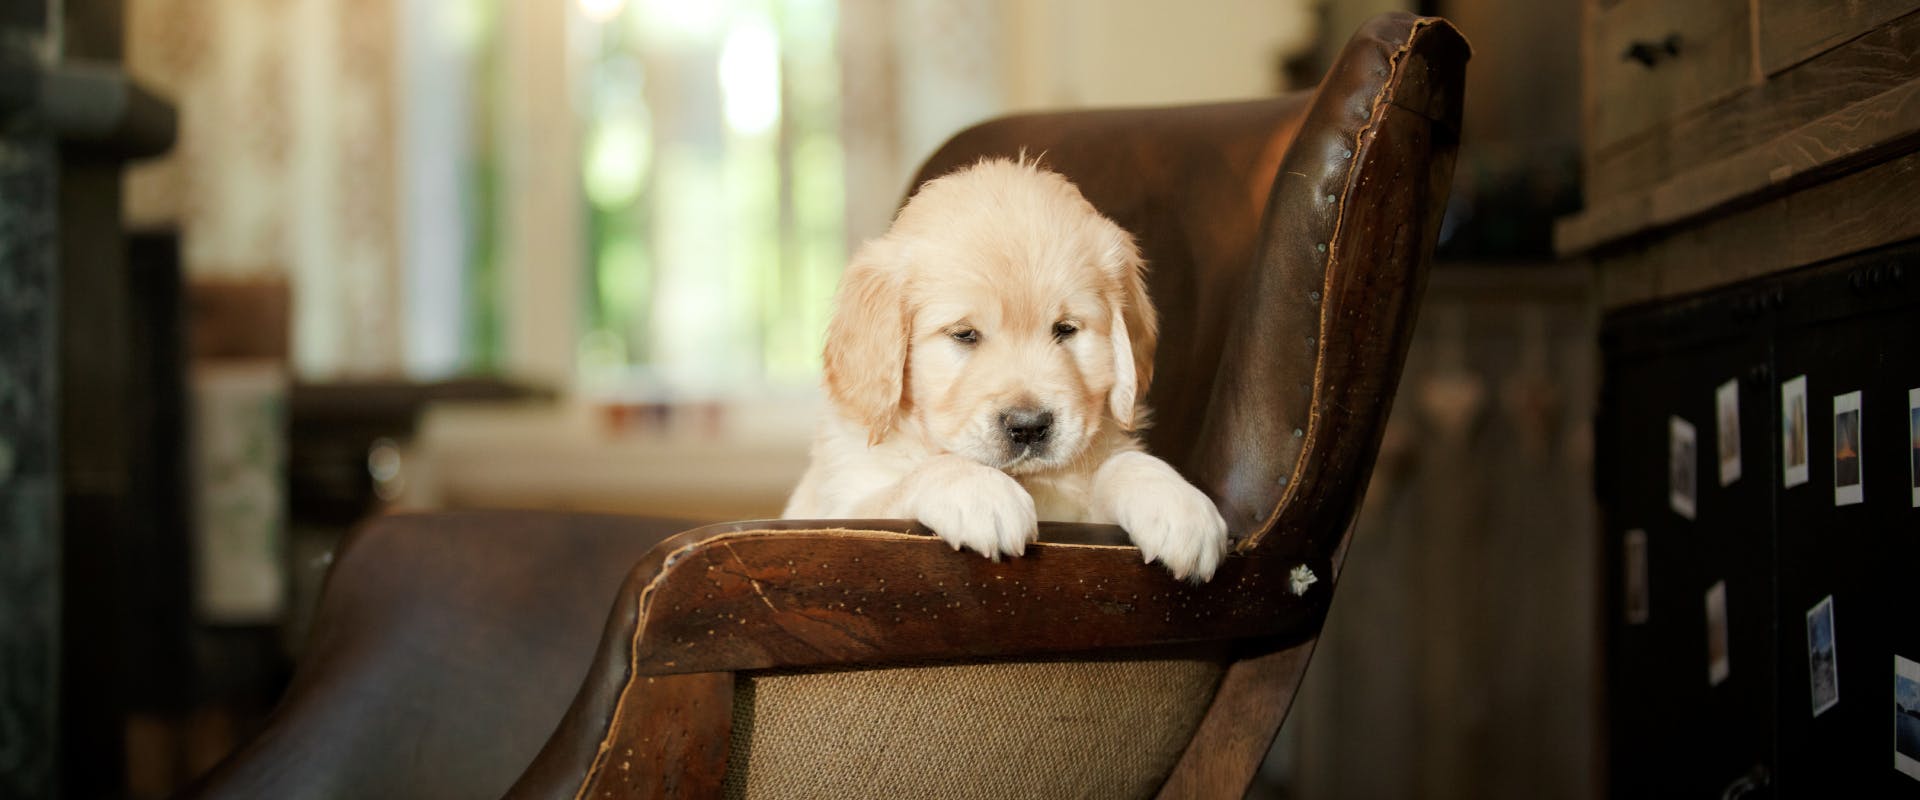 A puppy sits on a chair.